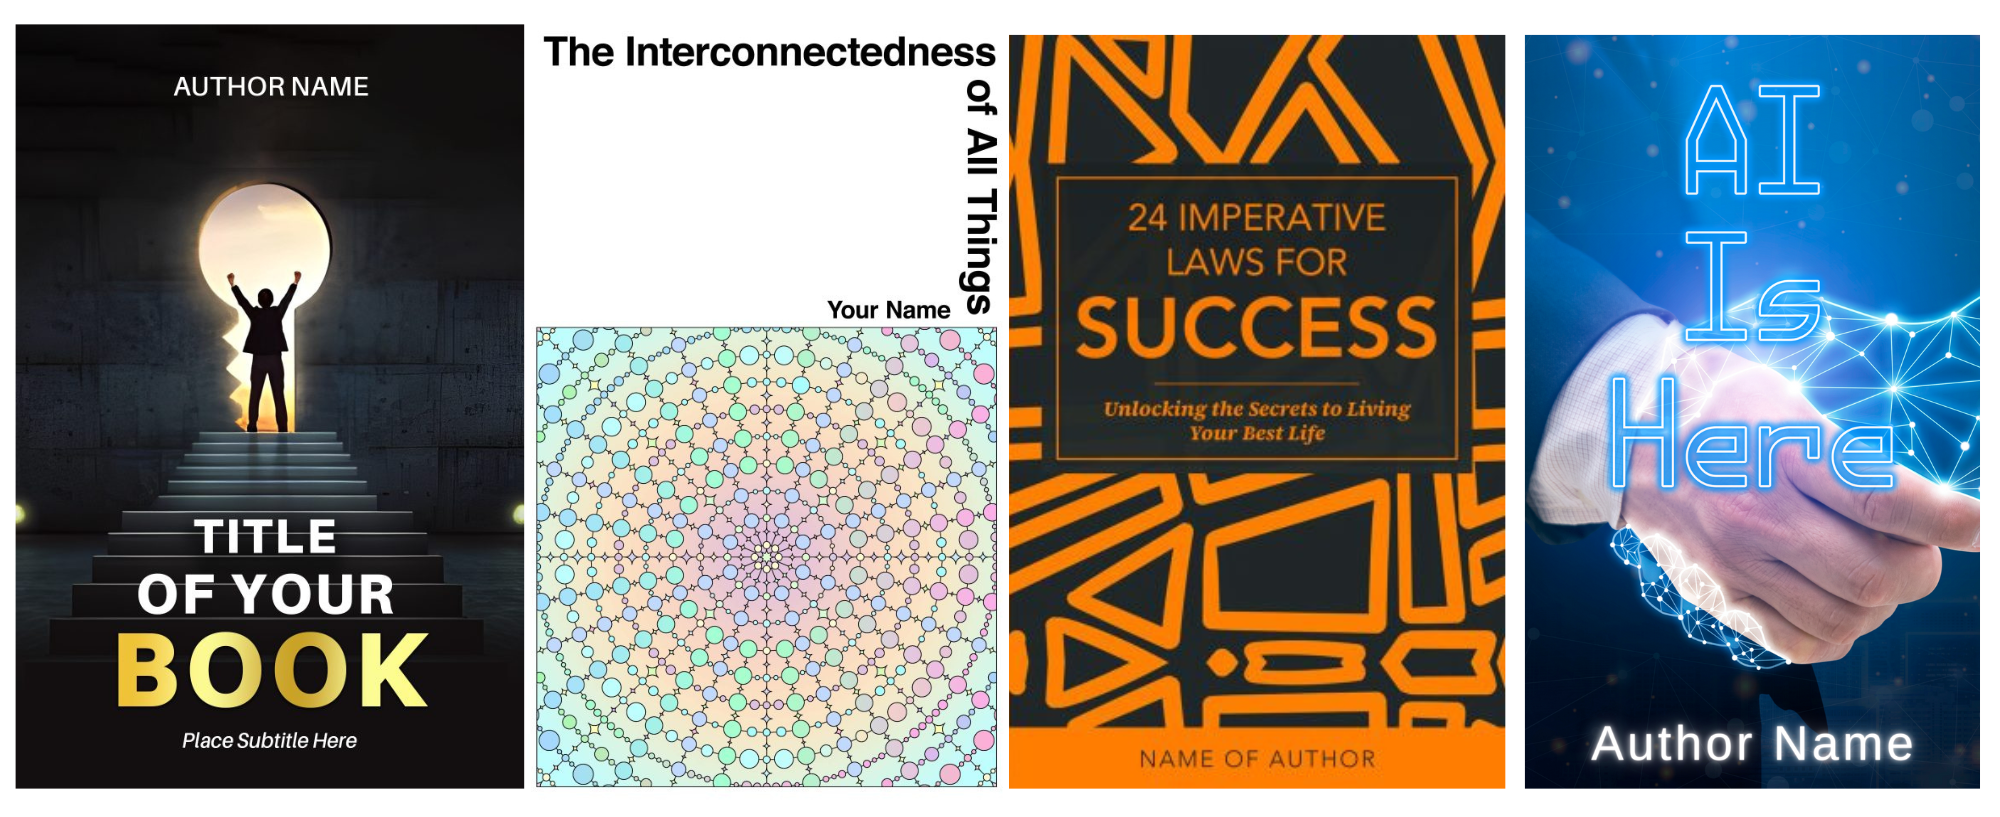 A collage of four book covers. The first cover shows a silhouette opening a door to light with the text "TITLE OF YOUR BOOK" and "Please Subtitle Here." The second has a colorful polygonal pattern on a white background with the title "The Interconnectedness of All Things." The third cover is orange and black with geometric lines and the title "24 Imperative Laws for Success." The fourth features a hand touching a robotic hand with the title "AI Is Here. BookSelf Book Cover Design & Premade Book Covers